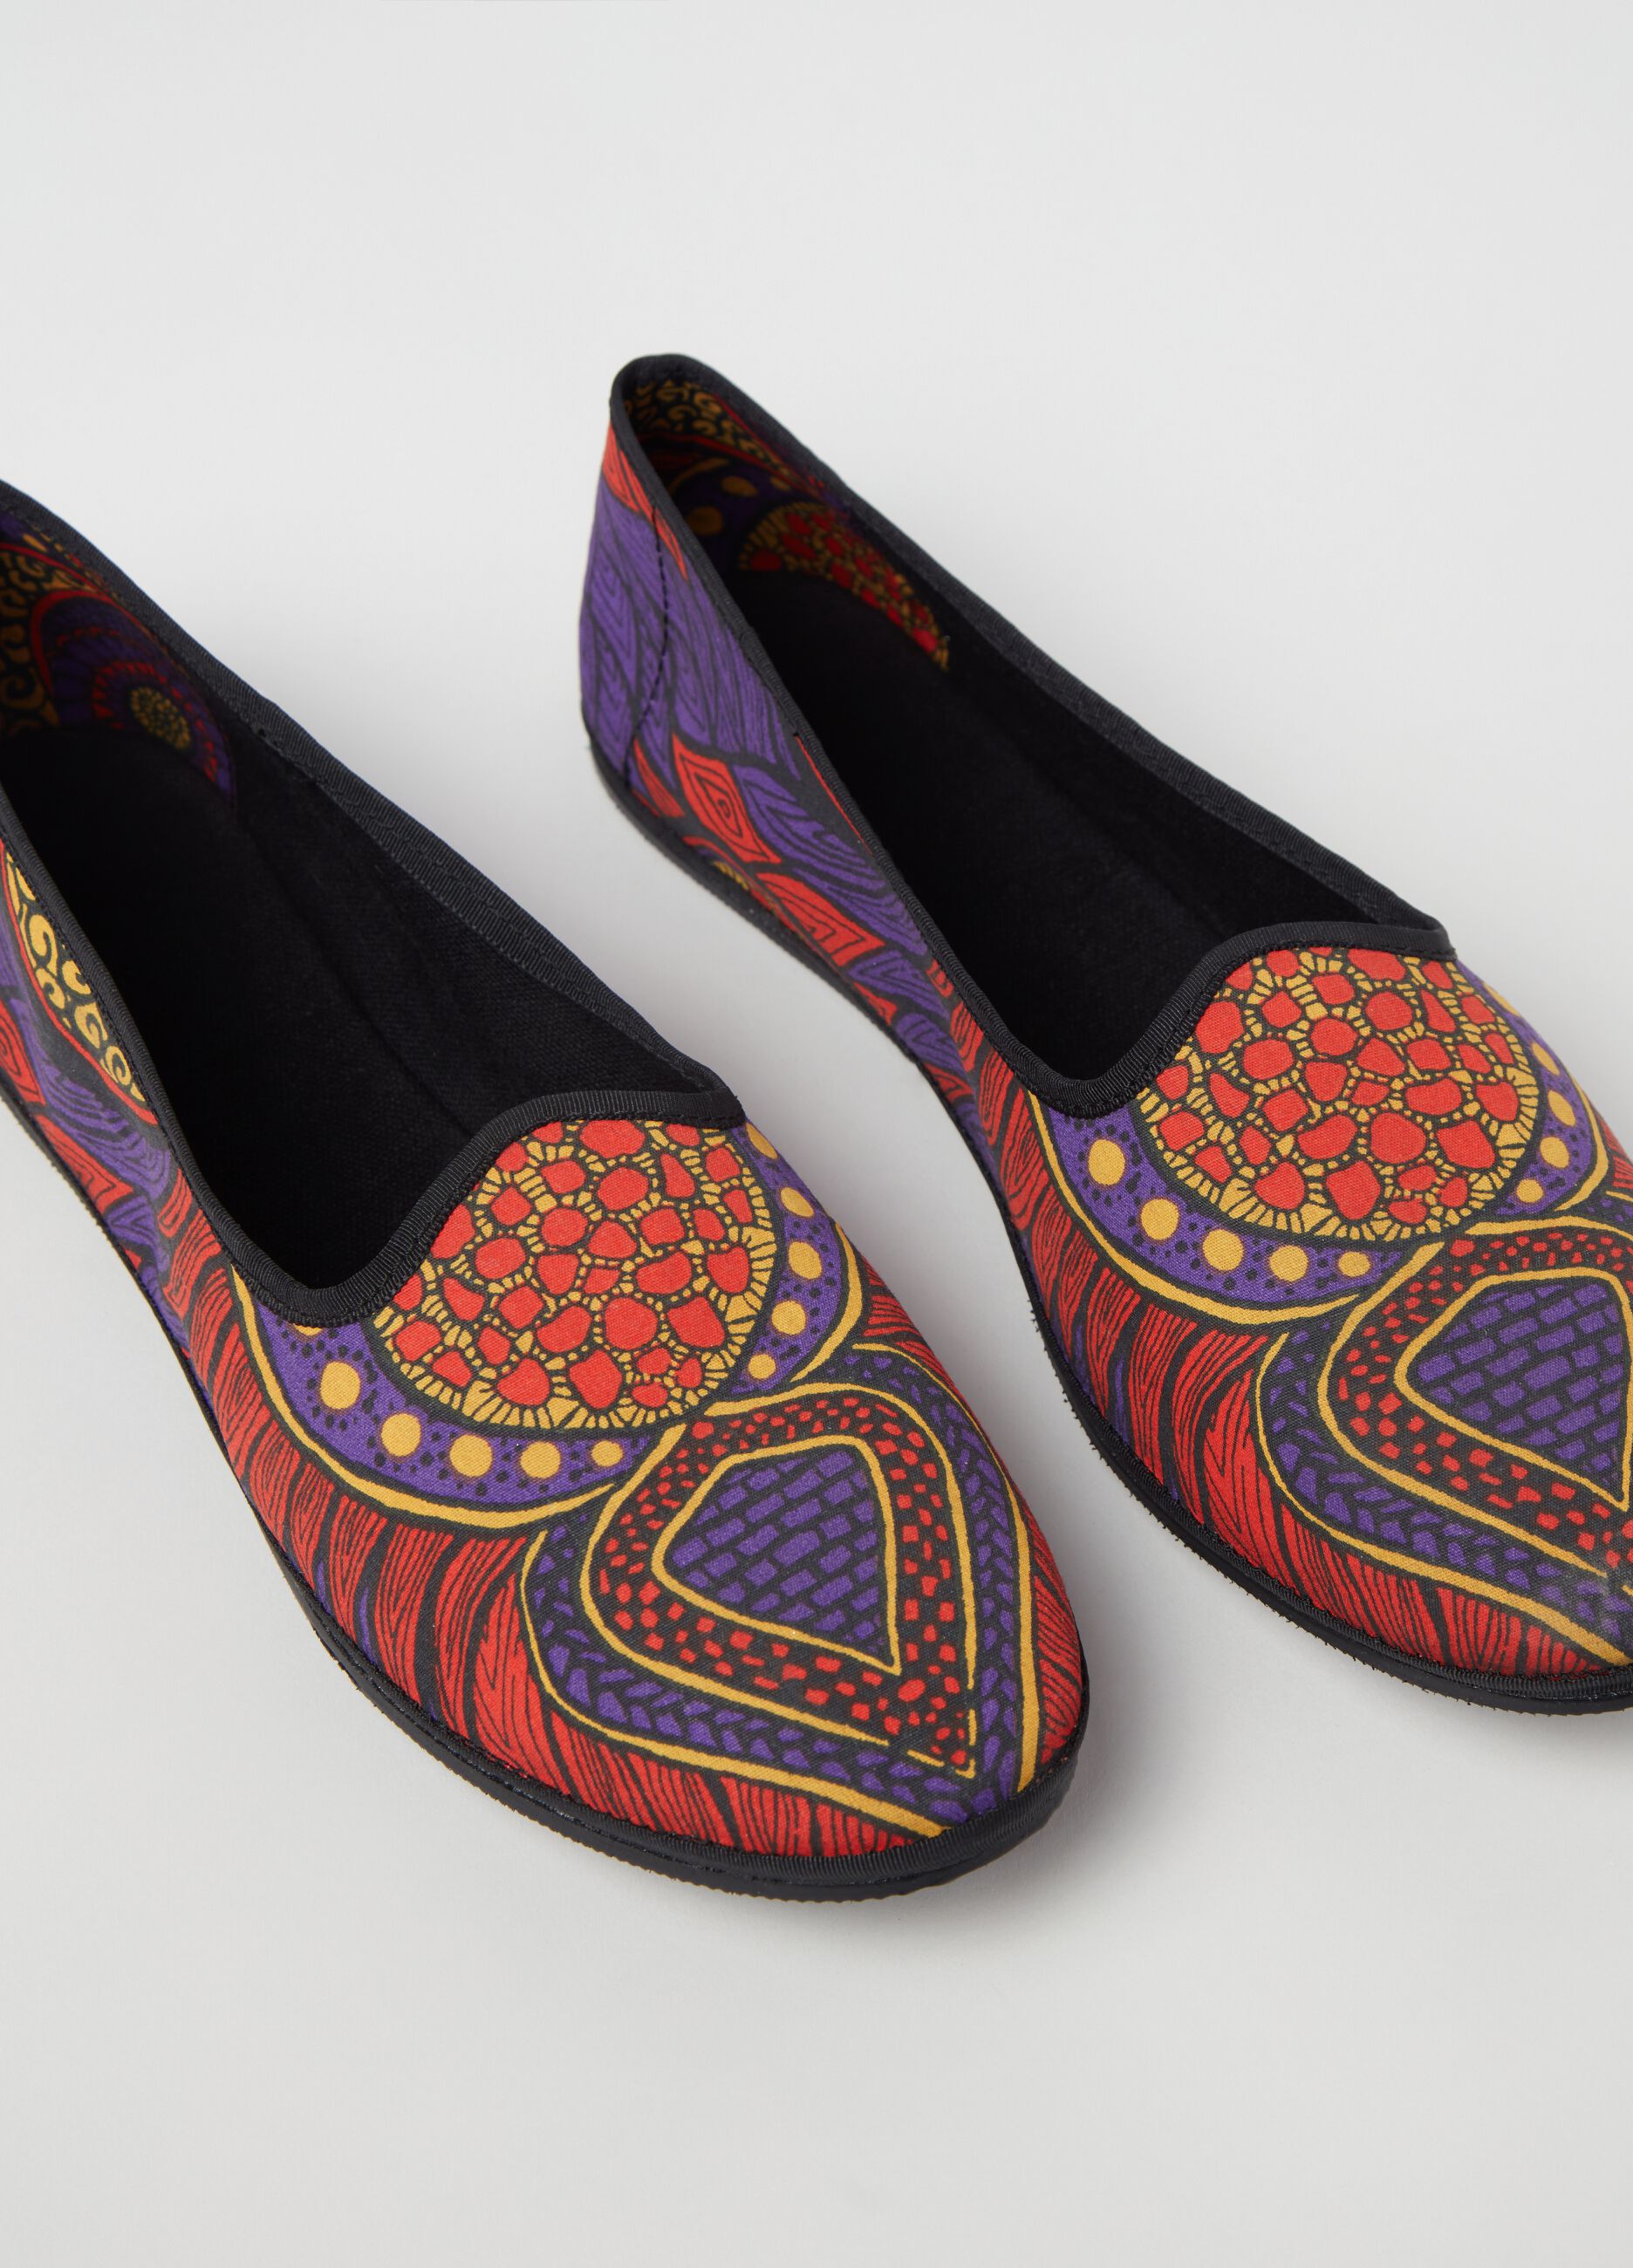 Slipper shoes with ethnic pattern